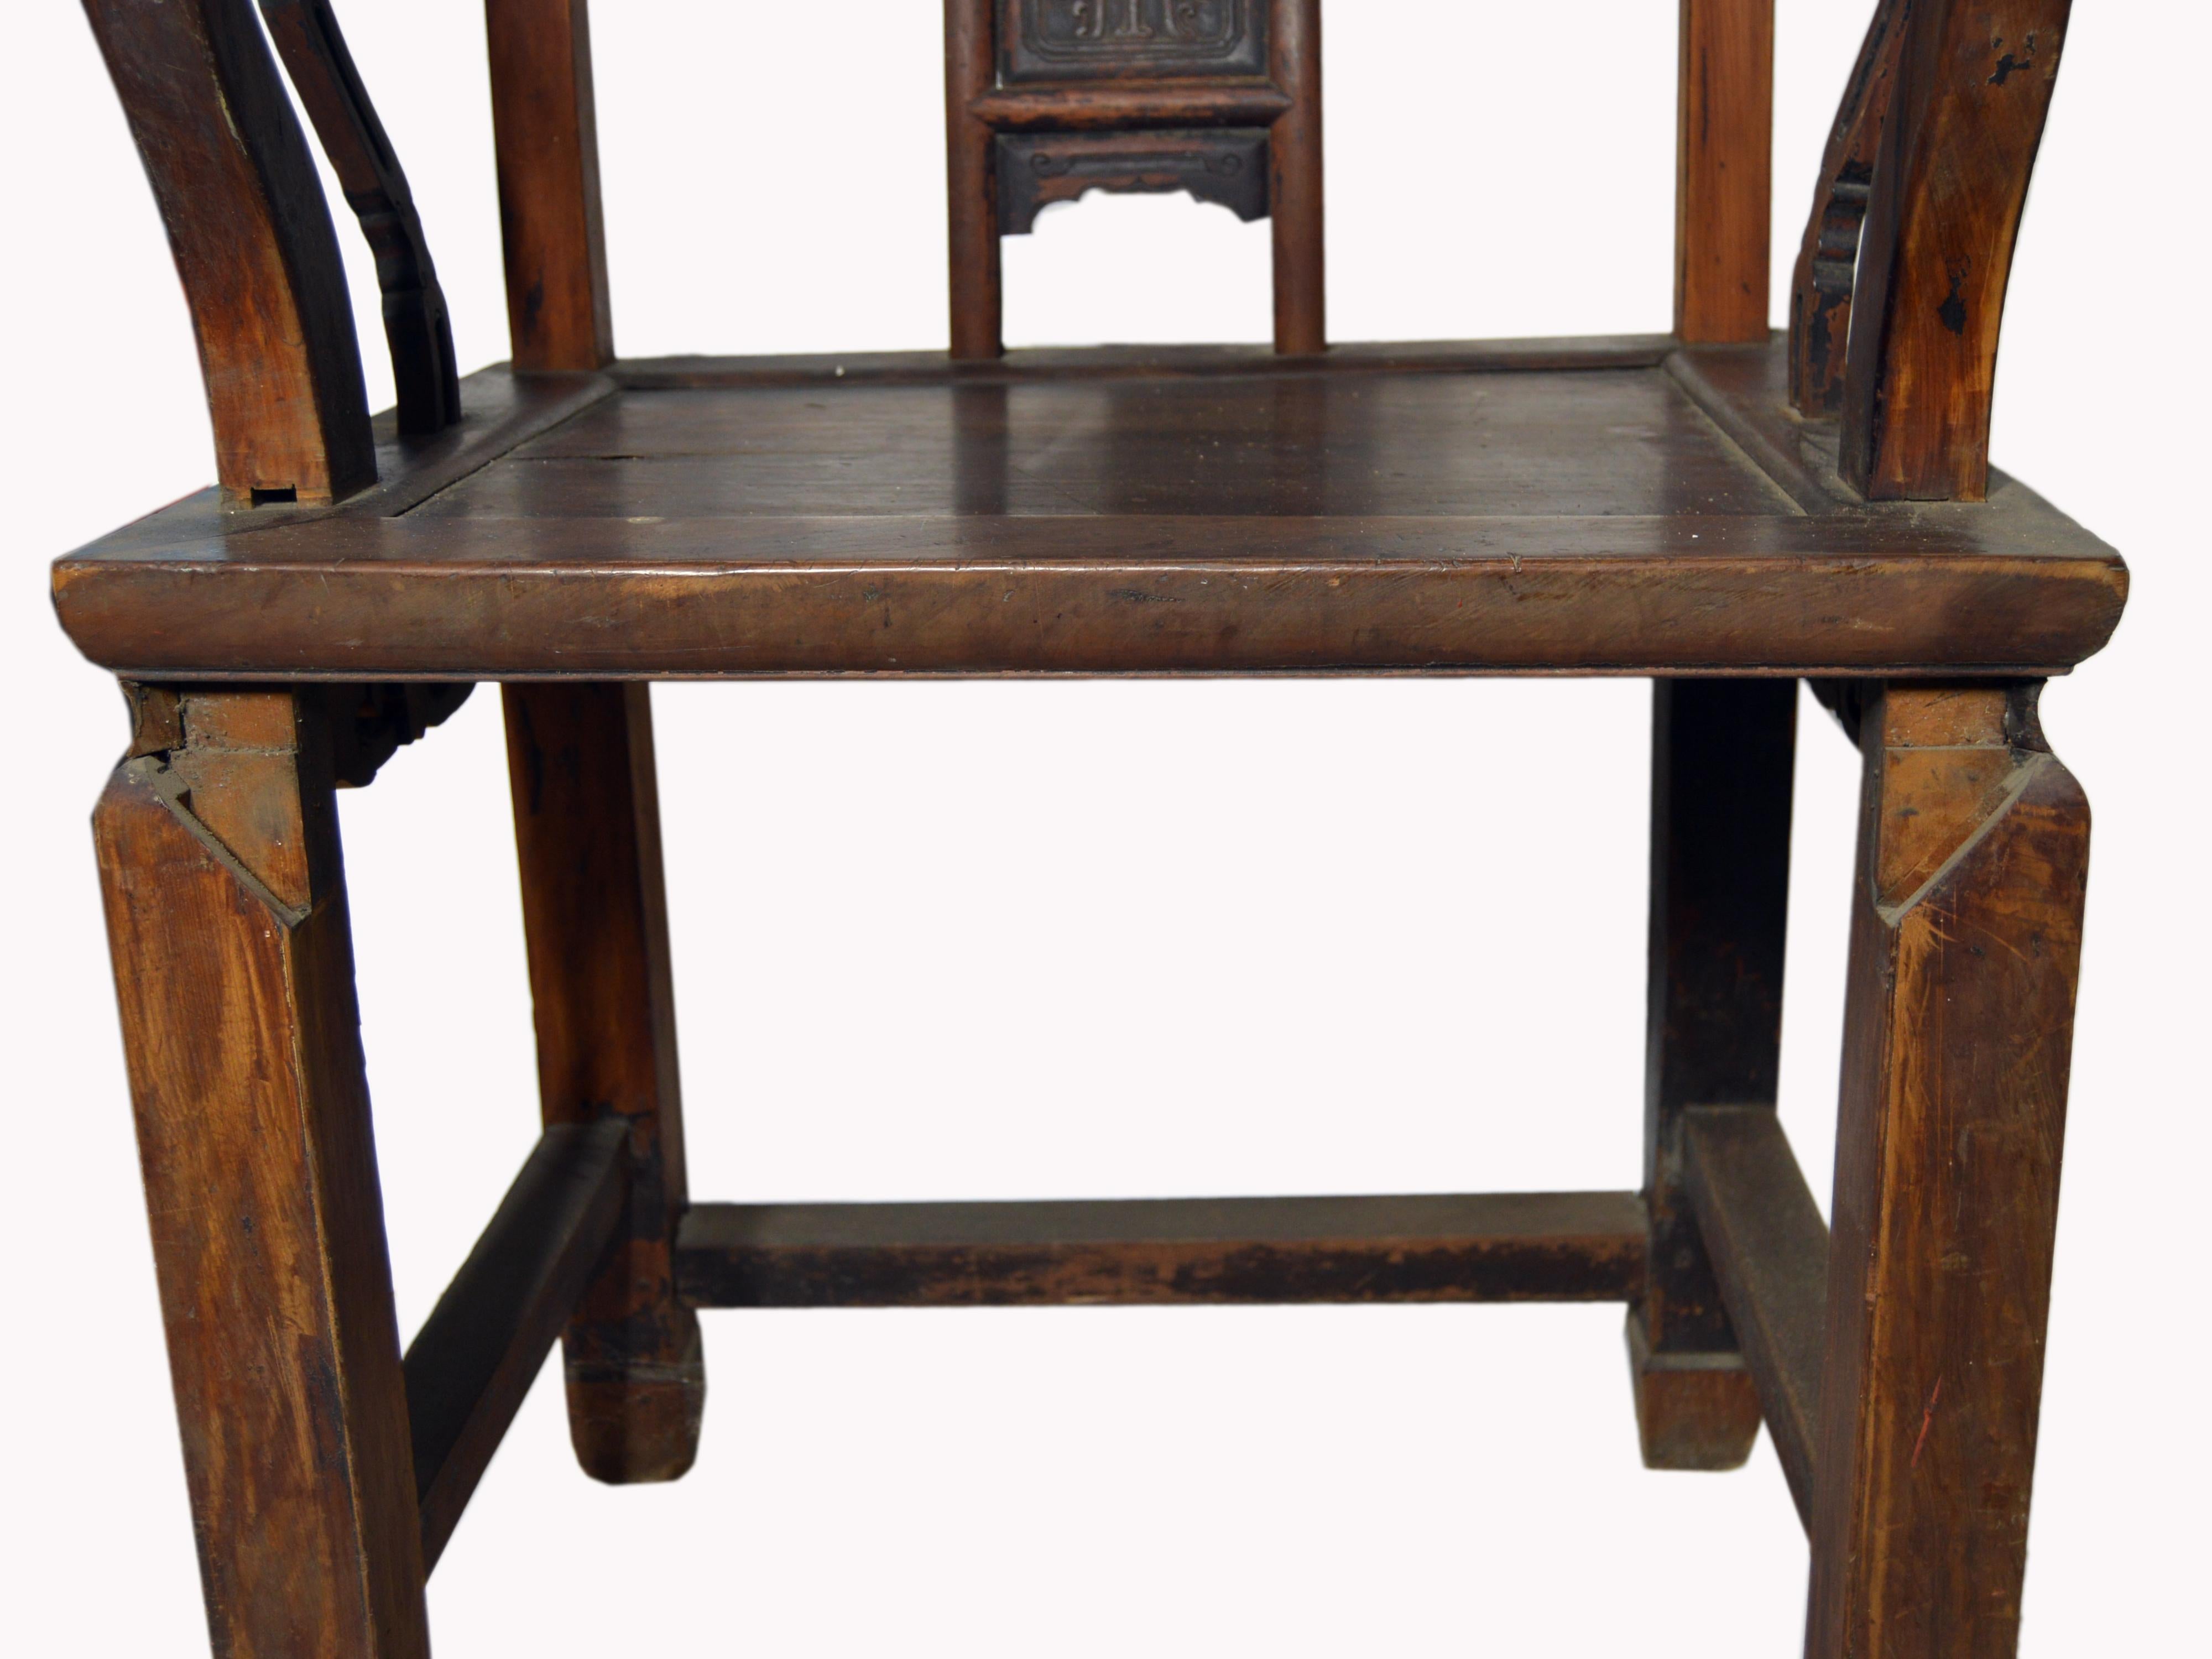 19th Century Chinese Yumu Official's Chair with Hand-Carved Splat and Fretwork In Good Condition For Sale In Yonkers, NY